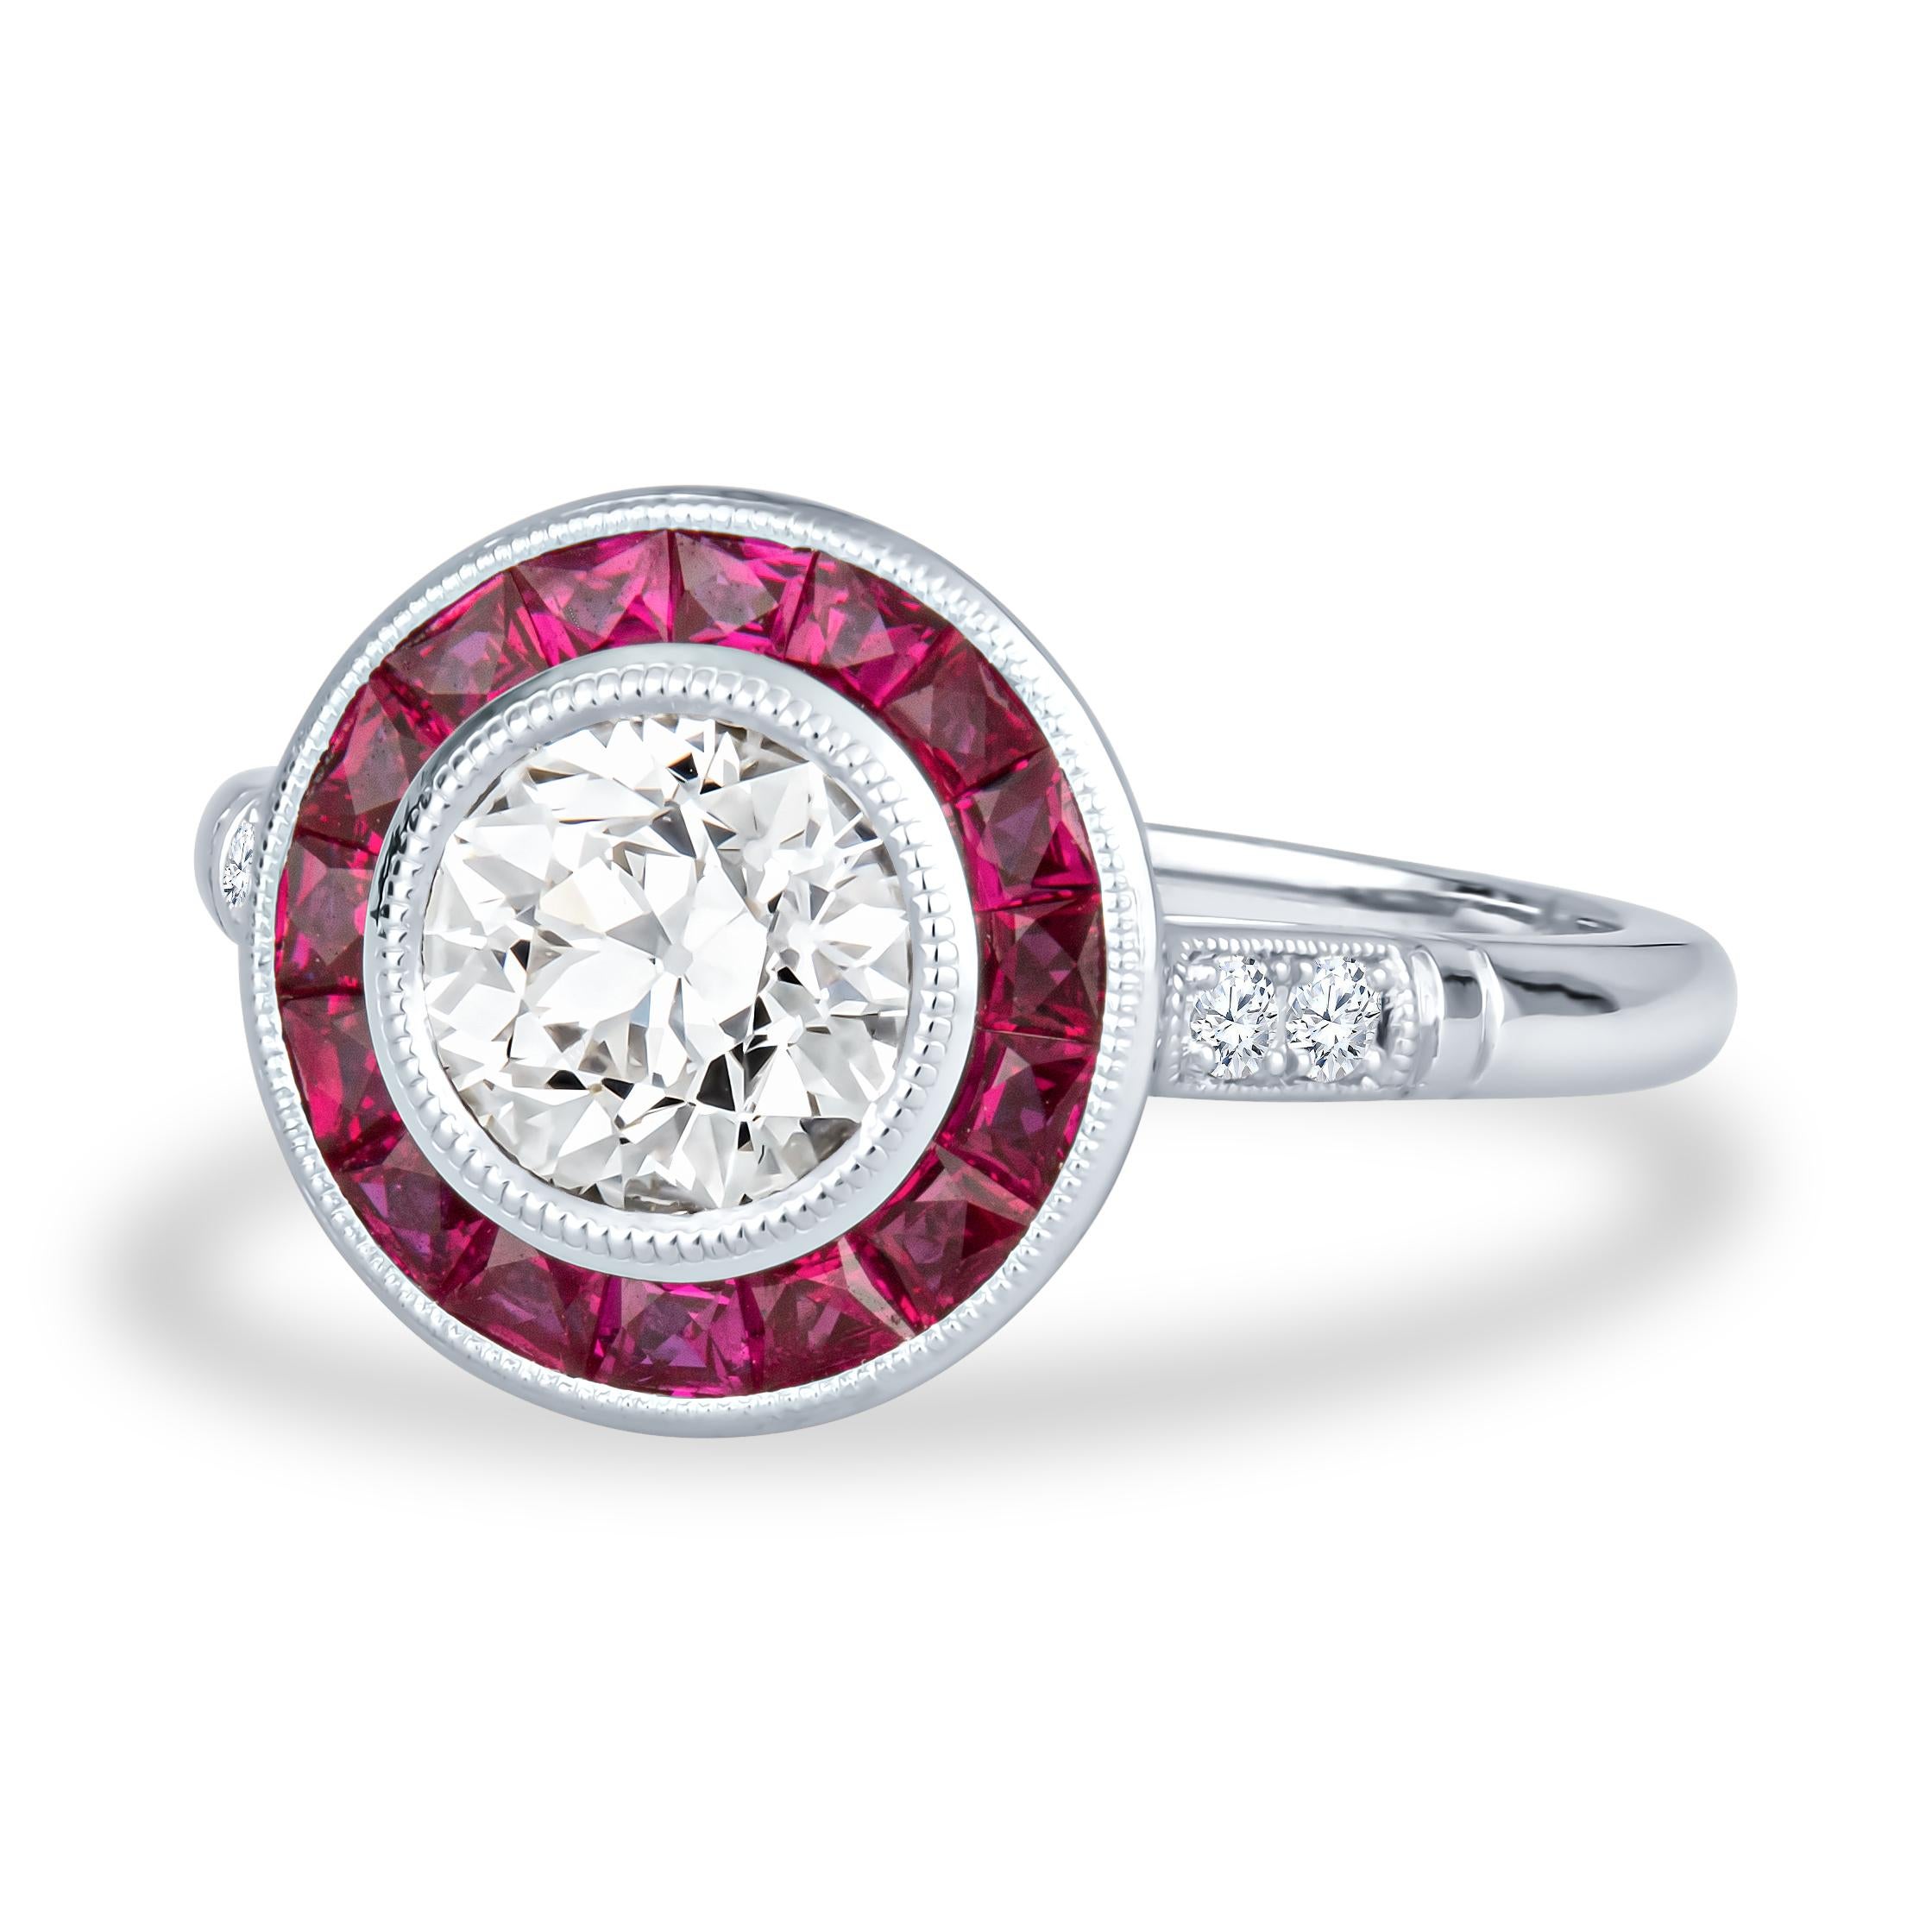 This exquisite, unique Shaftel Diamonds engagement ring features a 1.16ct Old European cut diamond (M VS2), surrounded by a beautiful halo of 0.75ct total weight in rubies and 0.07ct total weight in accent diamonds. The ring itself is 18kt white